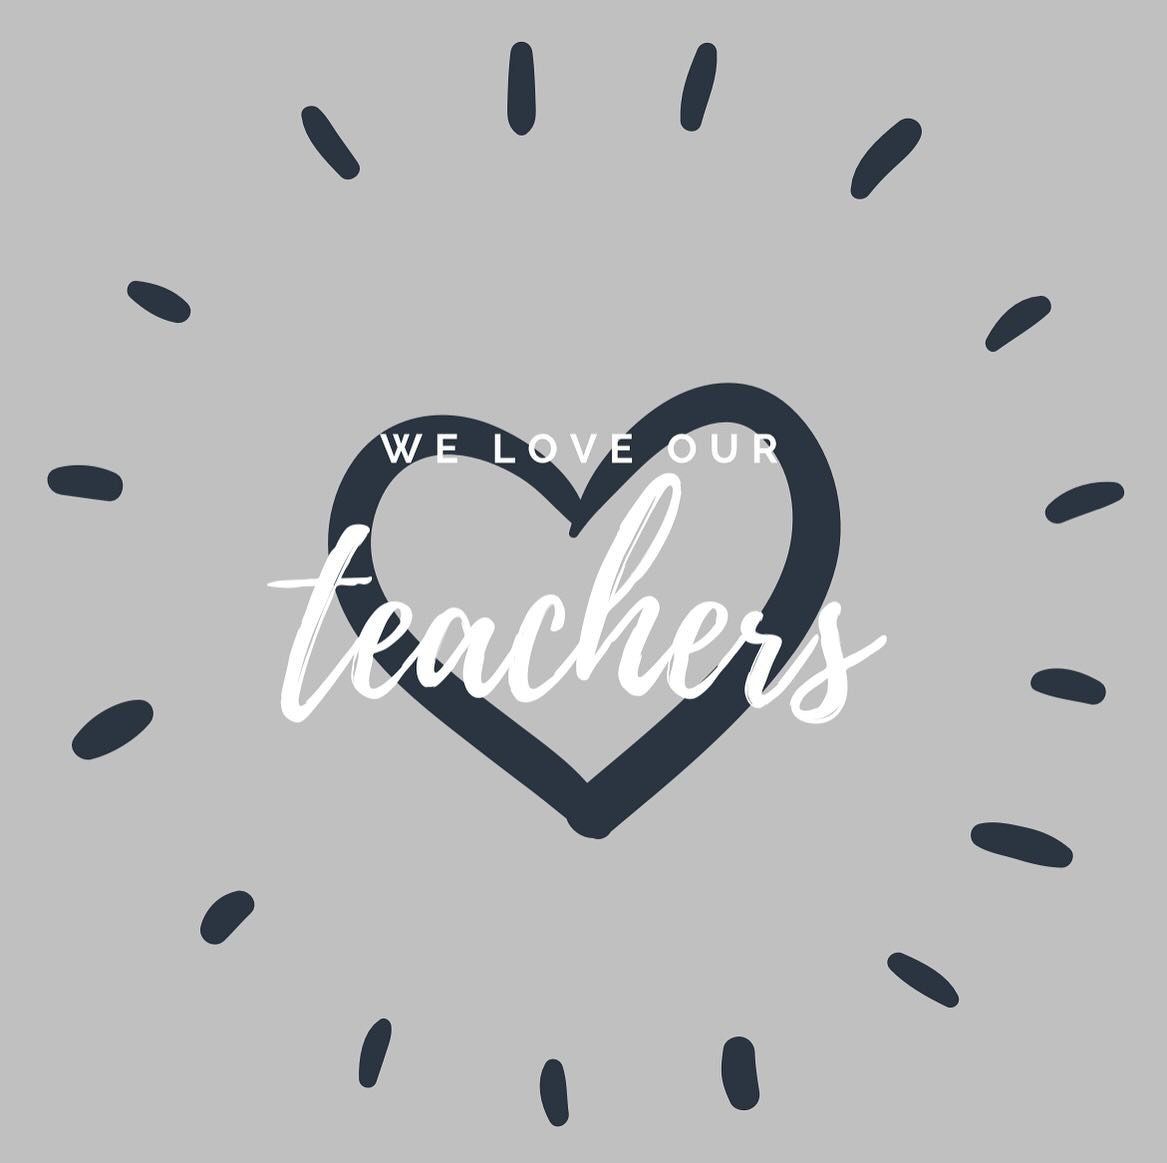 Happy National Teacher Appreciation Week 🍎⁠📝 AND National Nurses Week 🩺
⁠
A huge THANK YOU to all of the amazing teachers & nurses at Premier Charter School!

Their hard work does not go unnoticed and we appreciate everything they do for our s